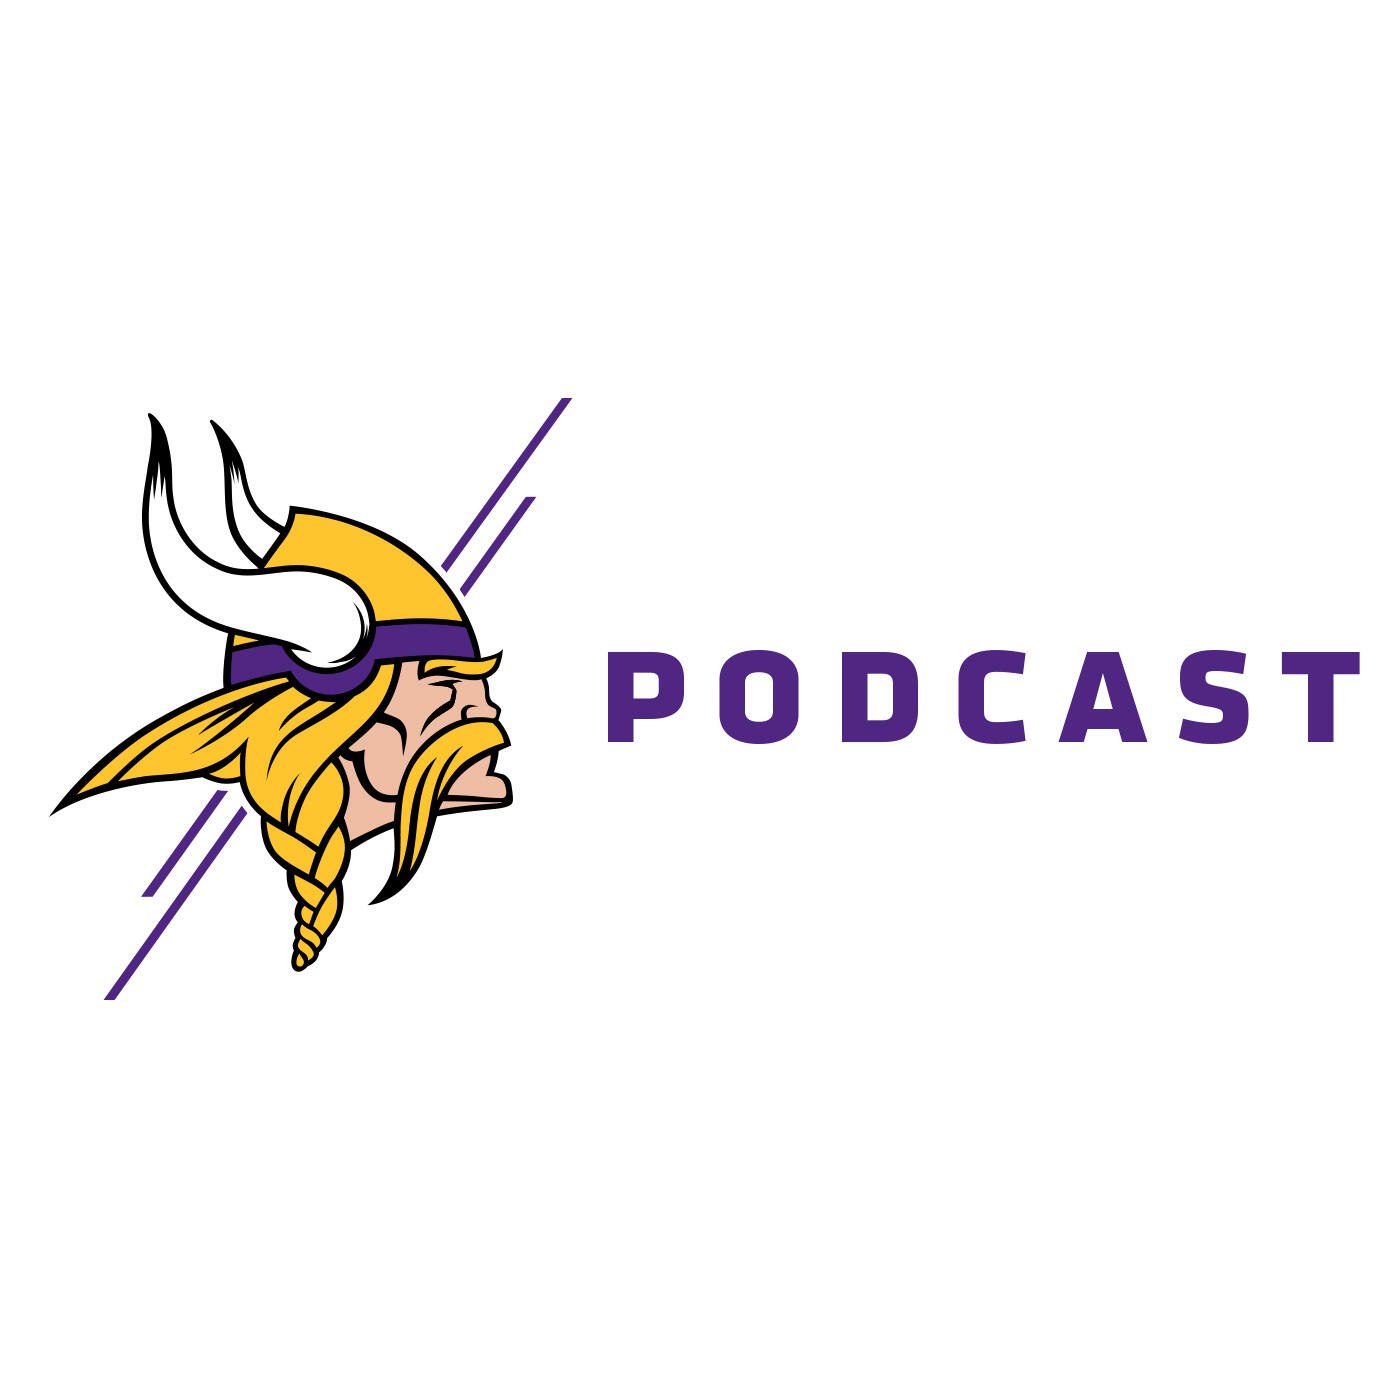 Vikings radio broadcasts headed to new stations - Duluth News